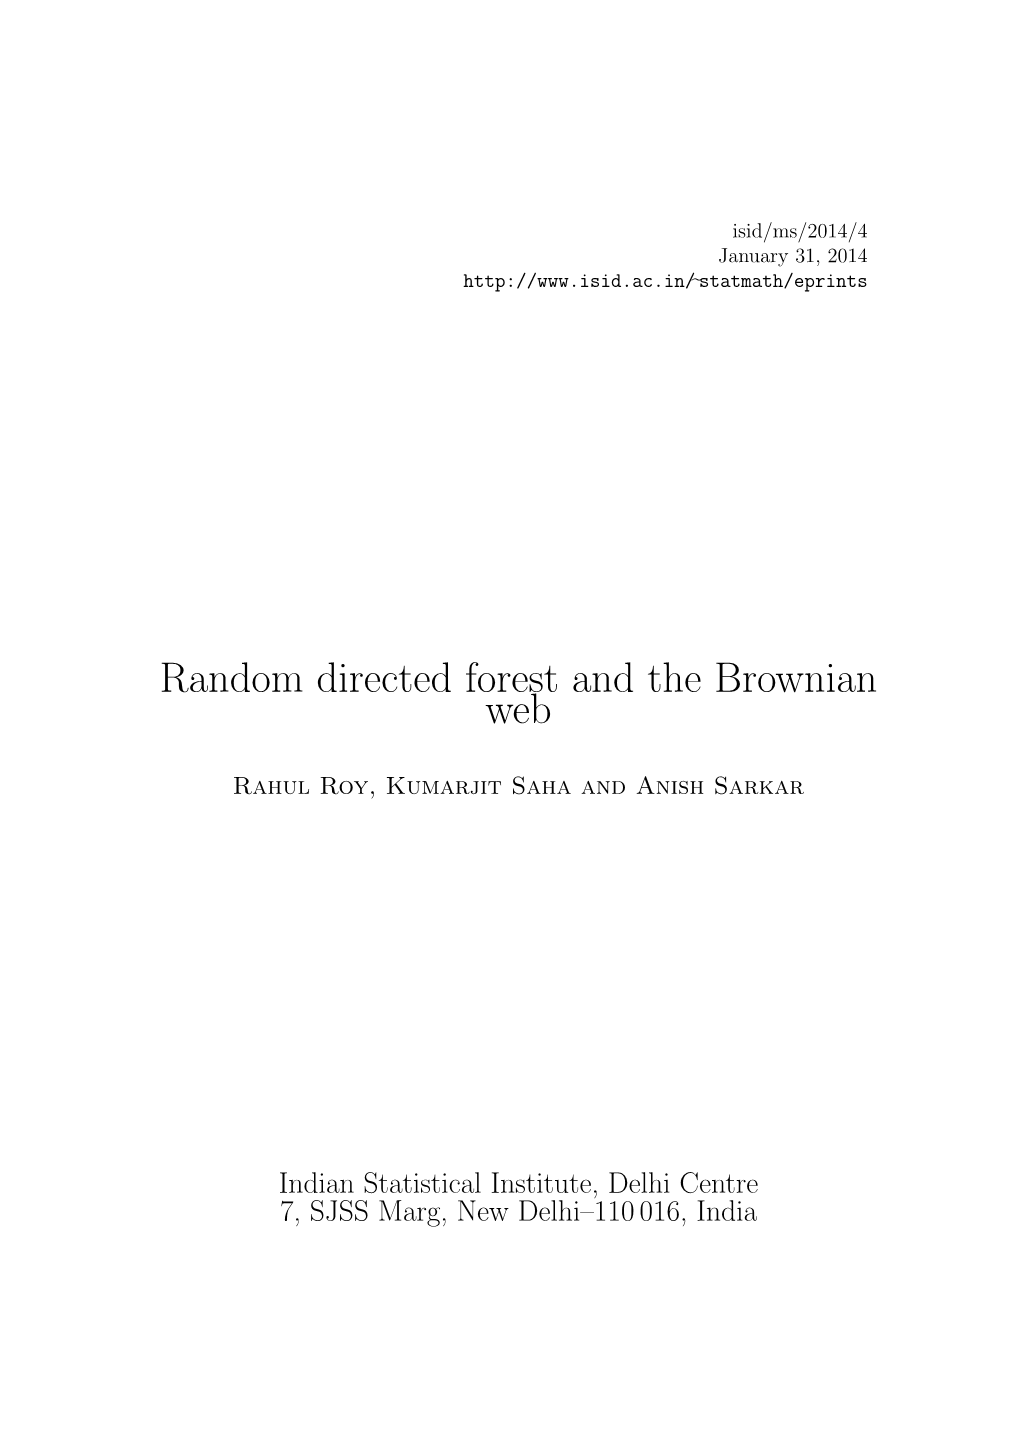 Random Directed Forest and the Brownian Web